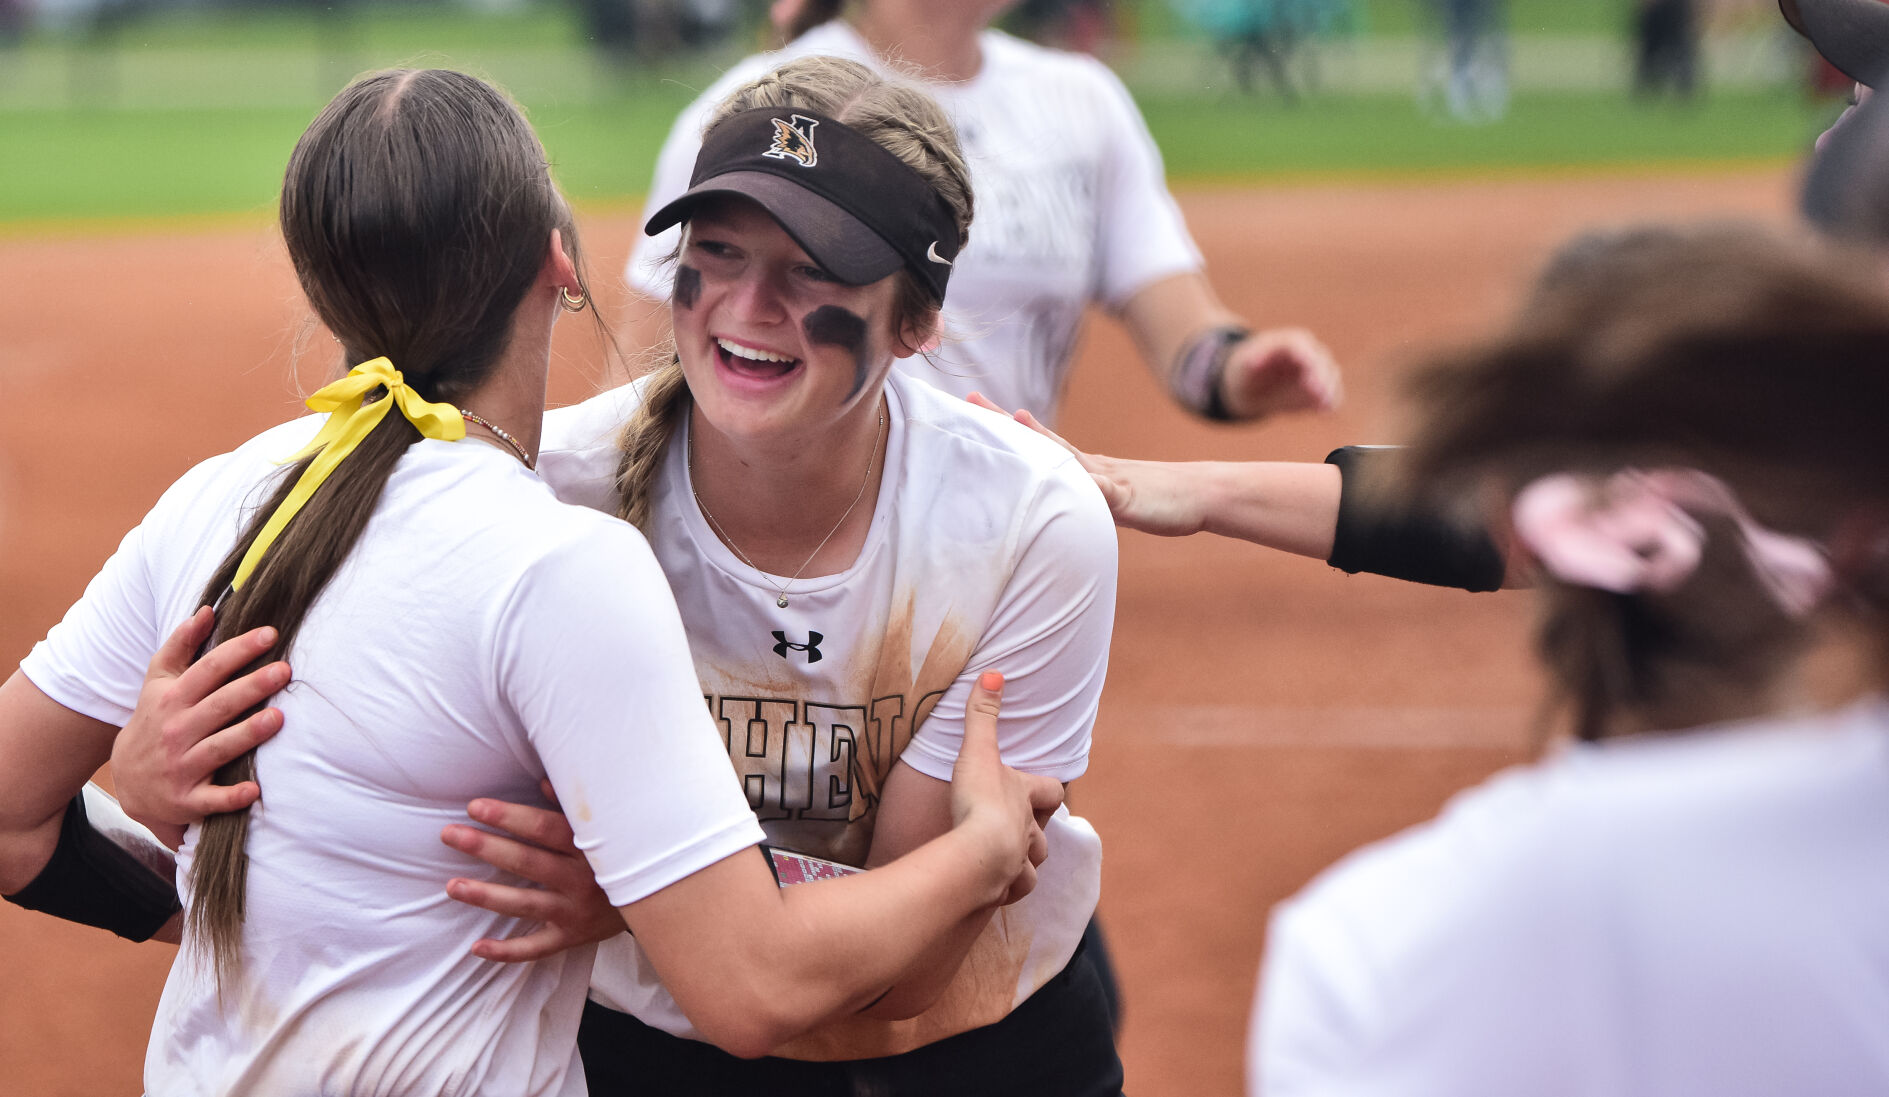 Athens Softball Inches Towards 6A Title with Dominant Day 1 Display, One Step Closer to Blue Map Glory